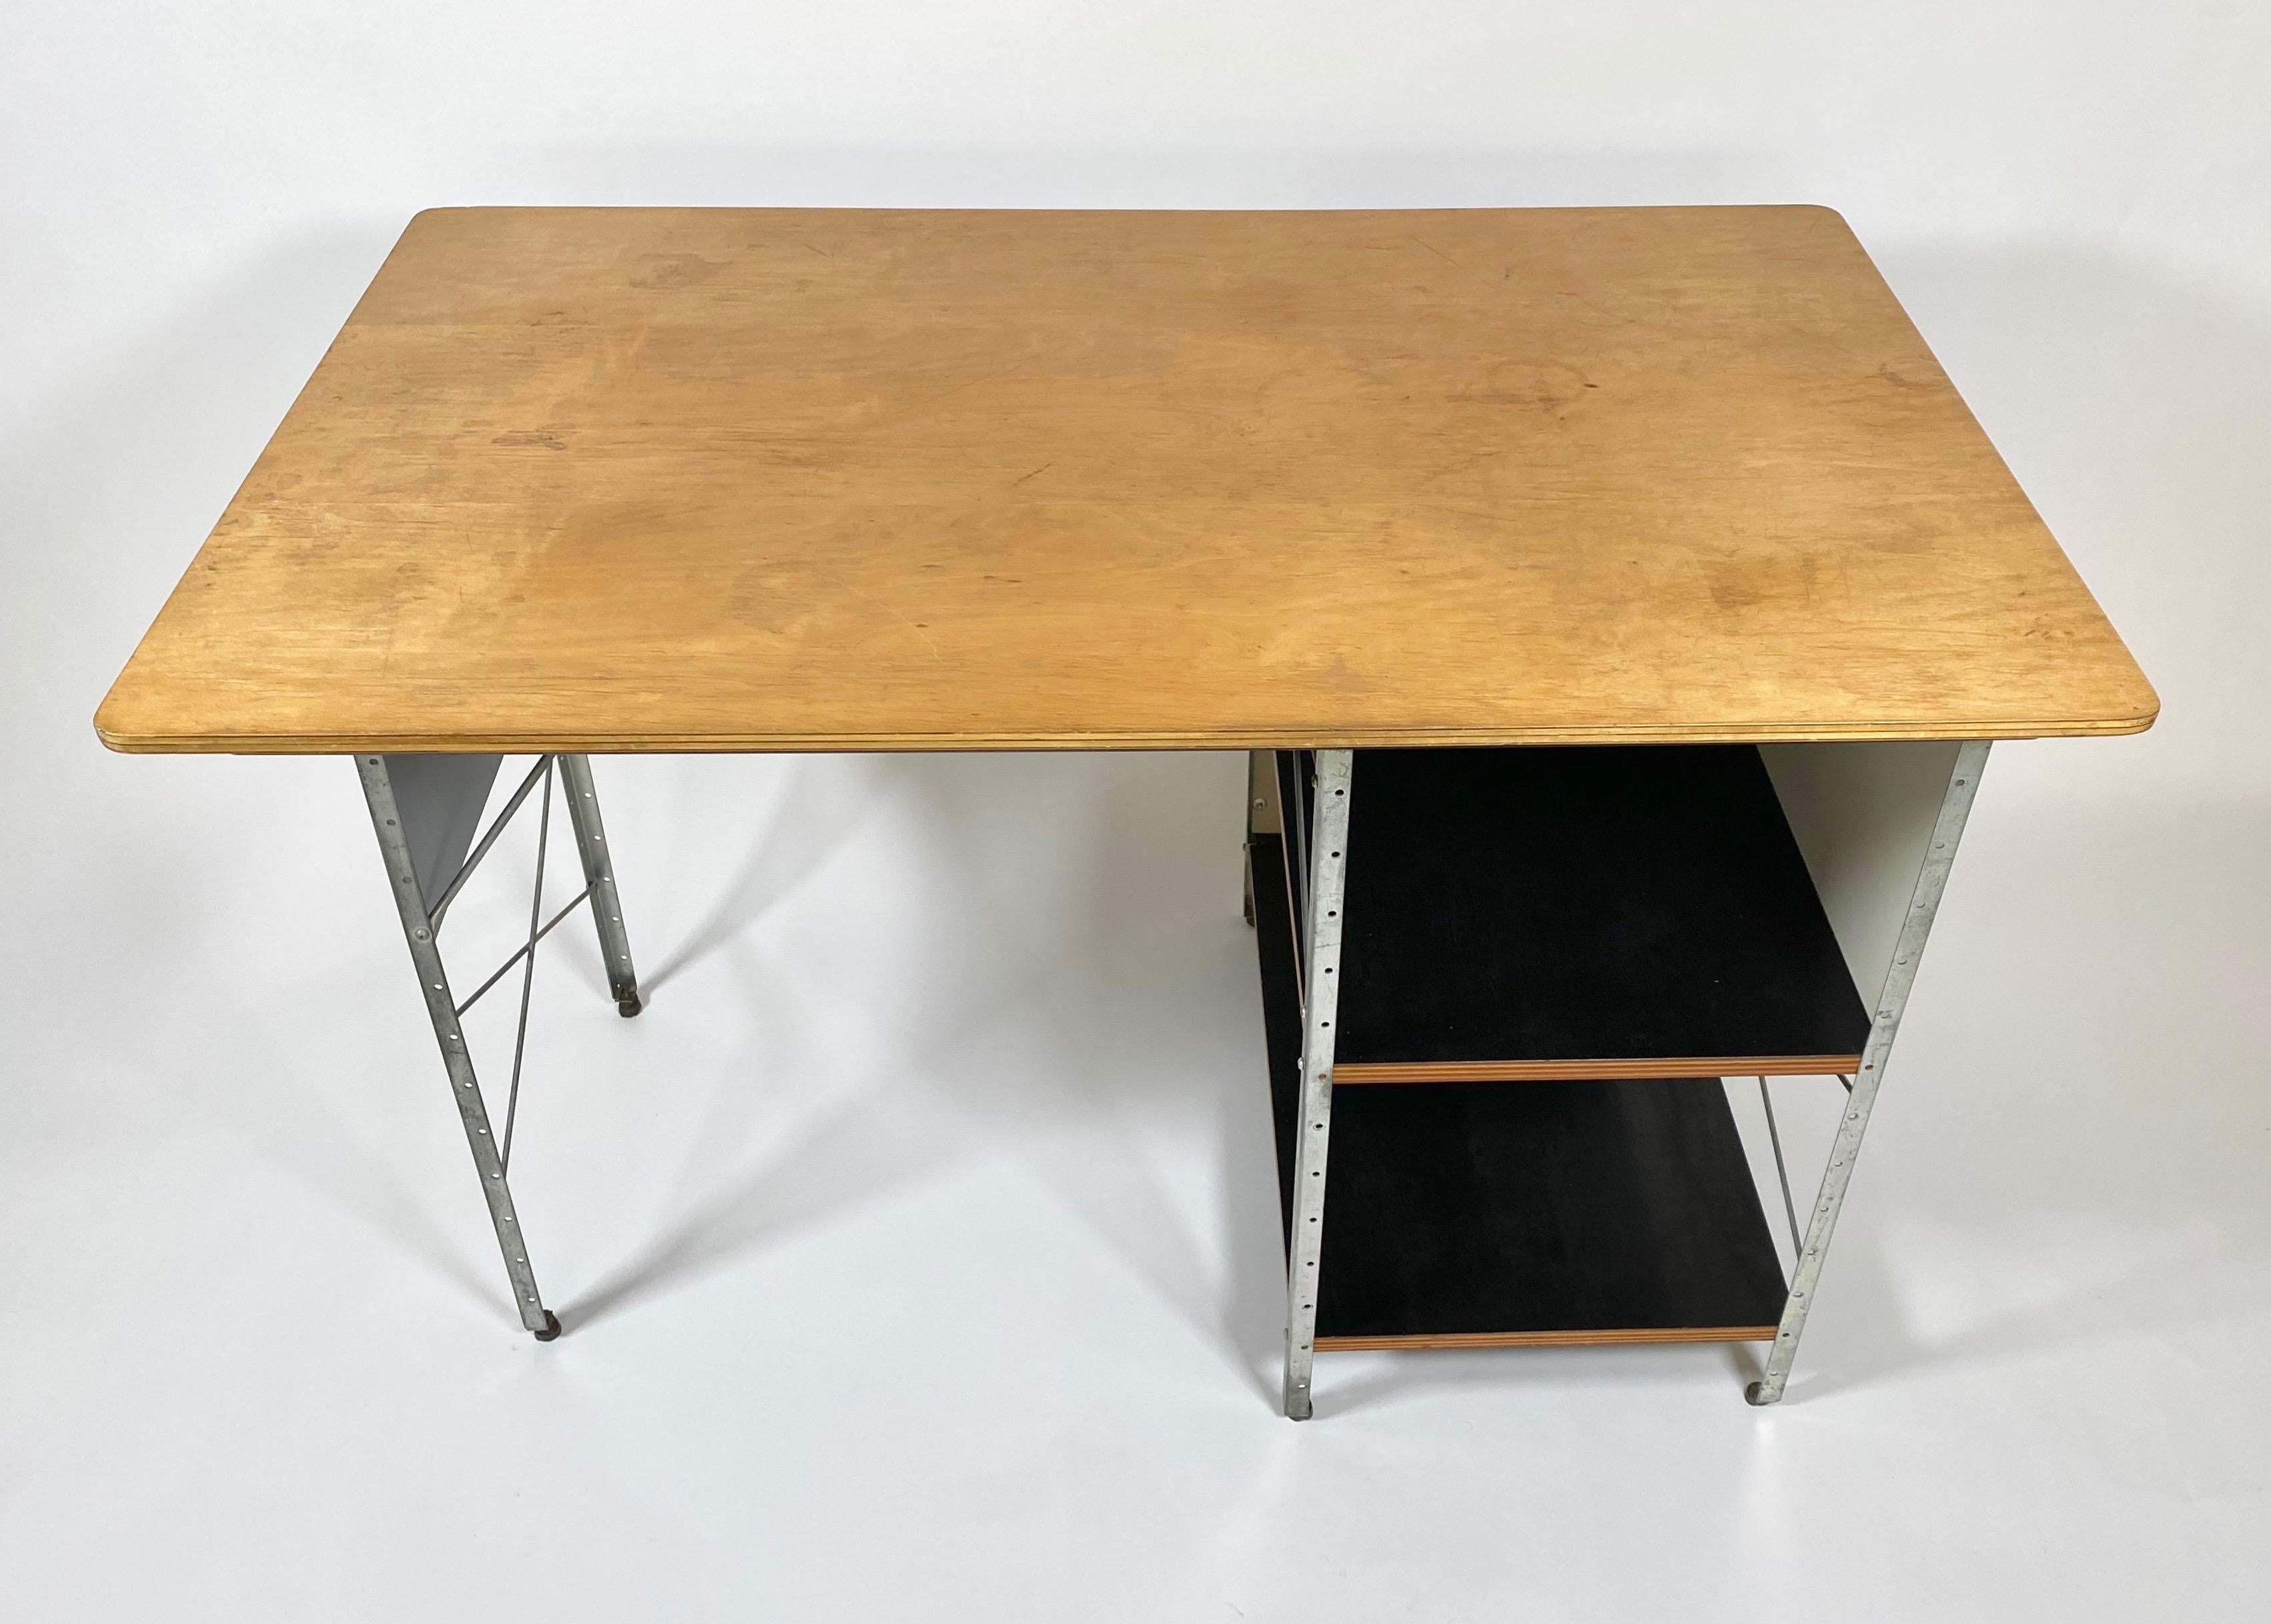 First production Eames ESU D-10-N desk 1950/ 1951 with a birch plywood top, zinc plated steel and lacquered gray and white masonite panels. These were only produced for two years after which they were modified and reintroduced in 1952. The desk was